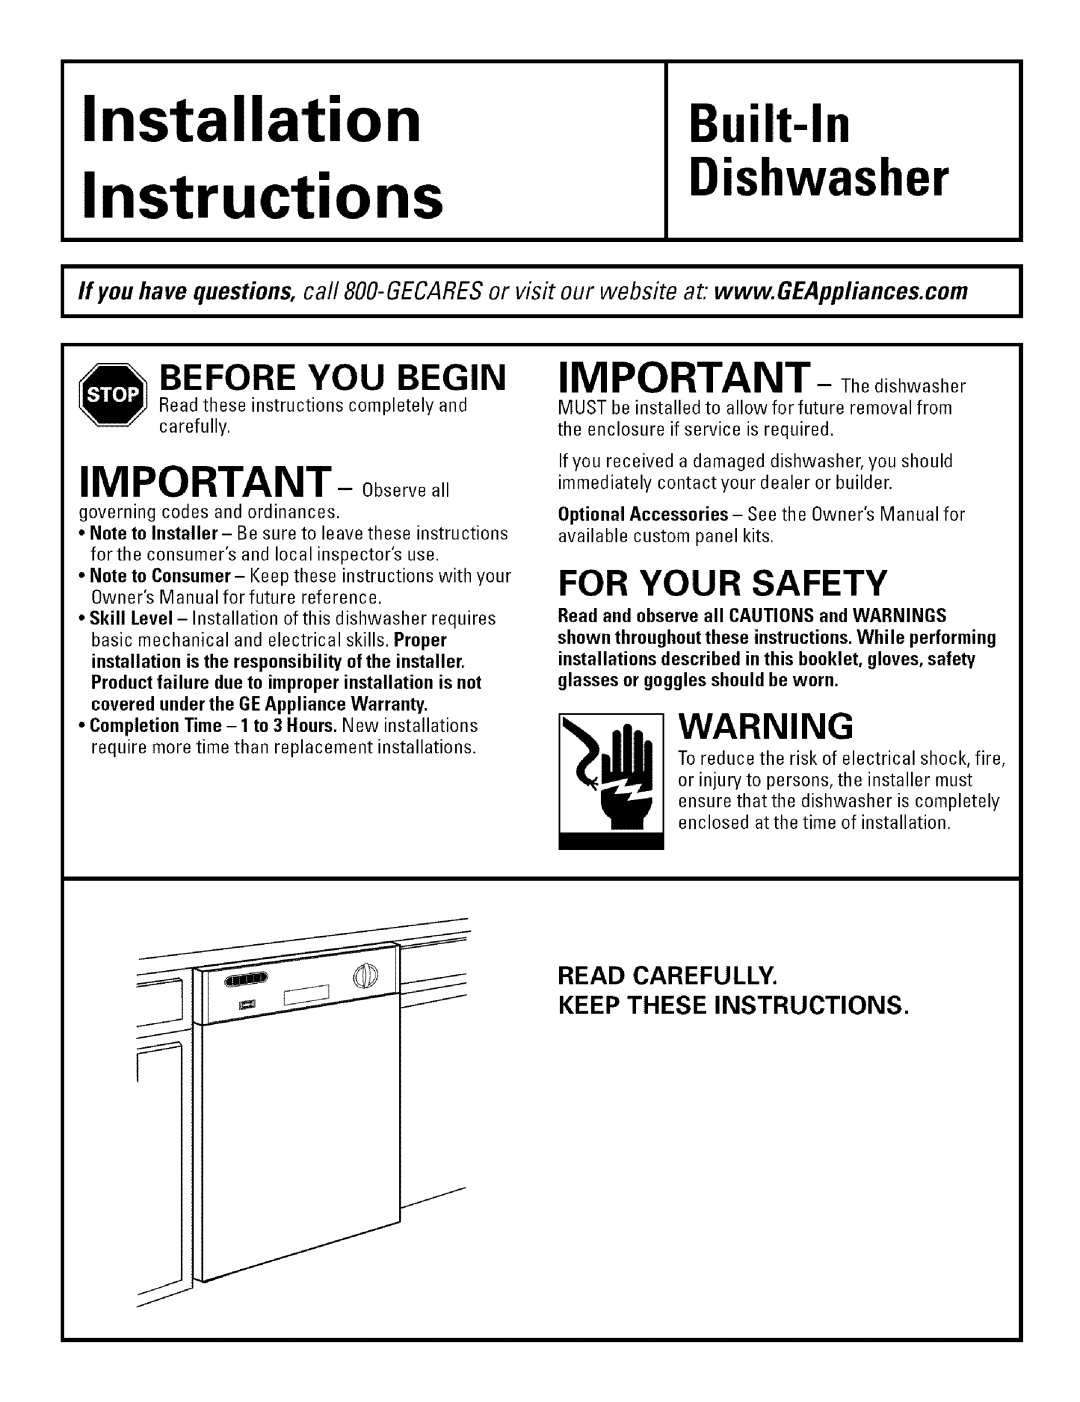 GE L0523252 installation instructions IMPORTANT- Observe all, Before You Begin, For Your Safety, Installation Instructions 